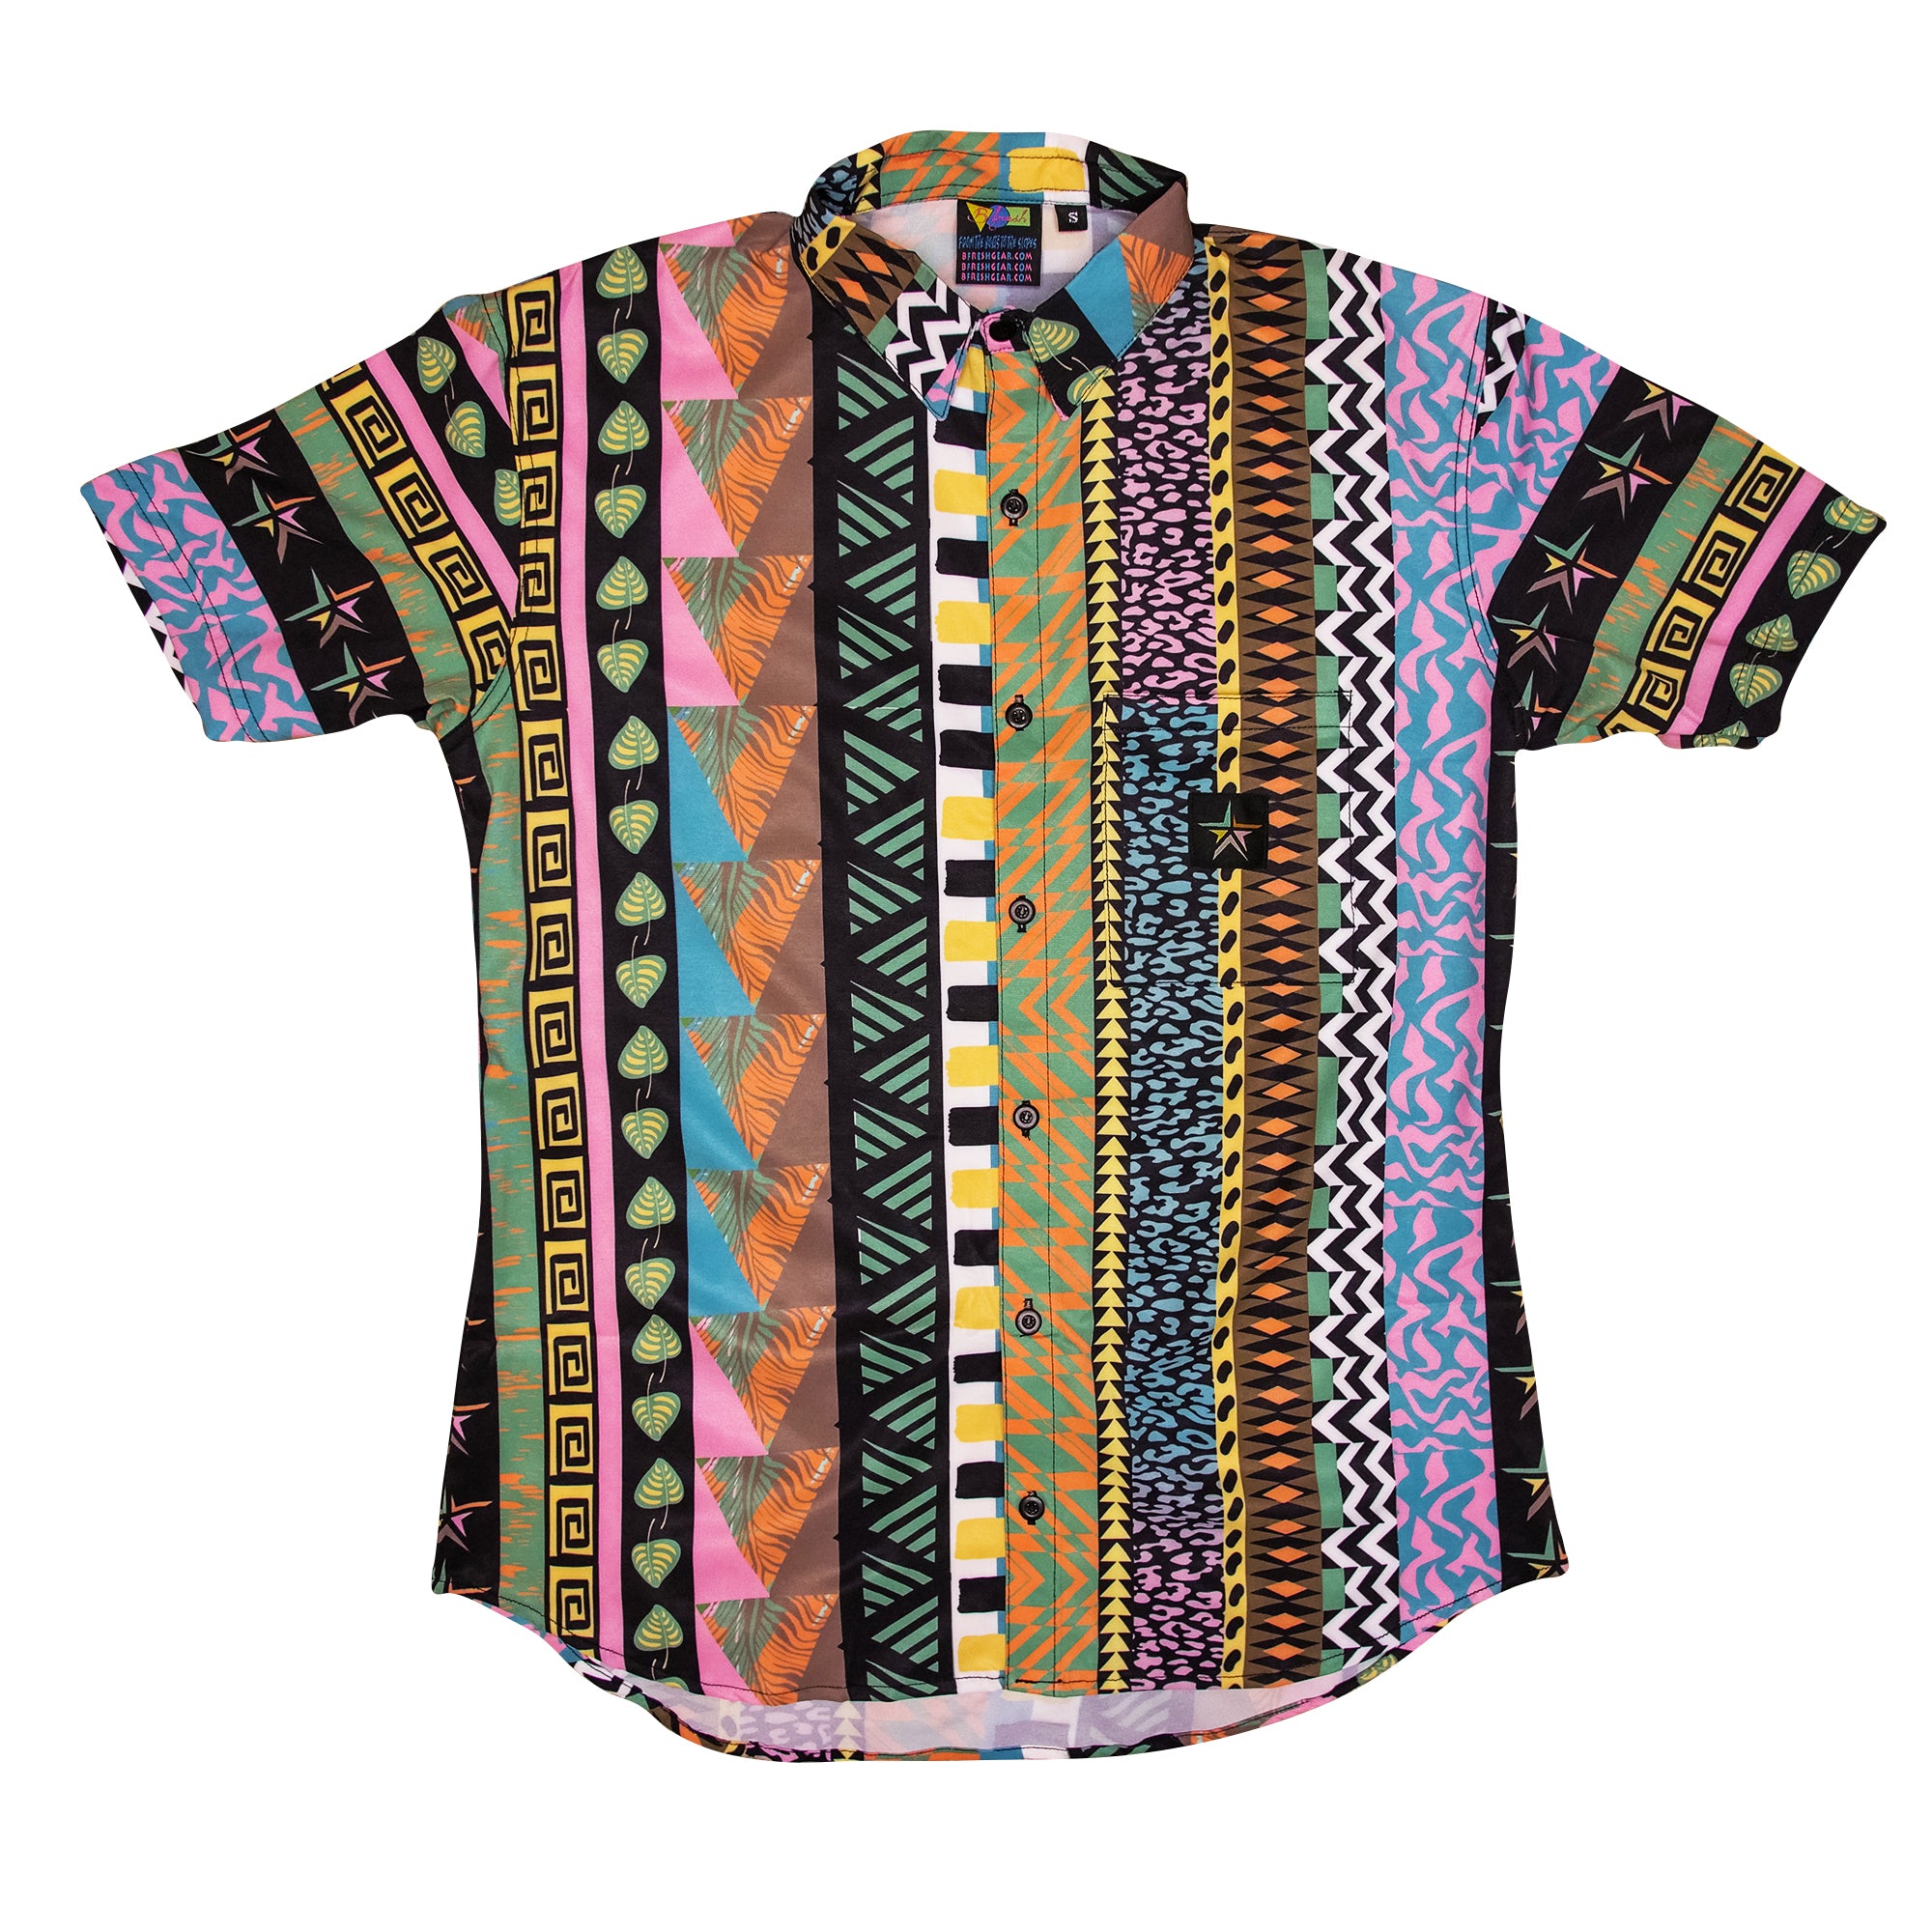 The Nickle Stretch Button Down Shirt- Five Points Juneteenth Jazzfest 90s Coogi Aztec Tribal 80s Pink Brown Green Yellow Blue Throwback Vintage Design. B Fresh Gear.